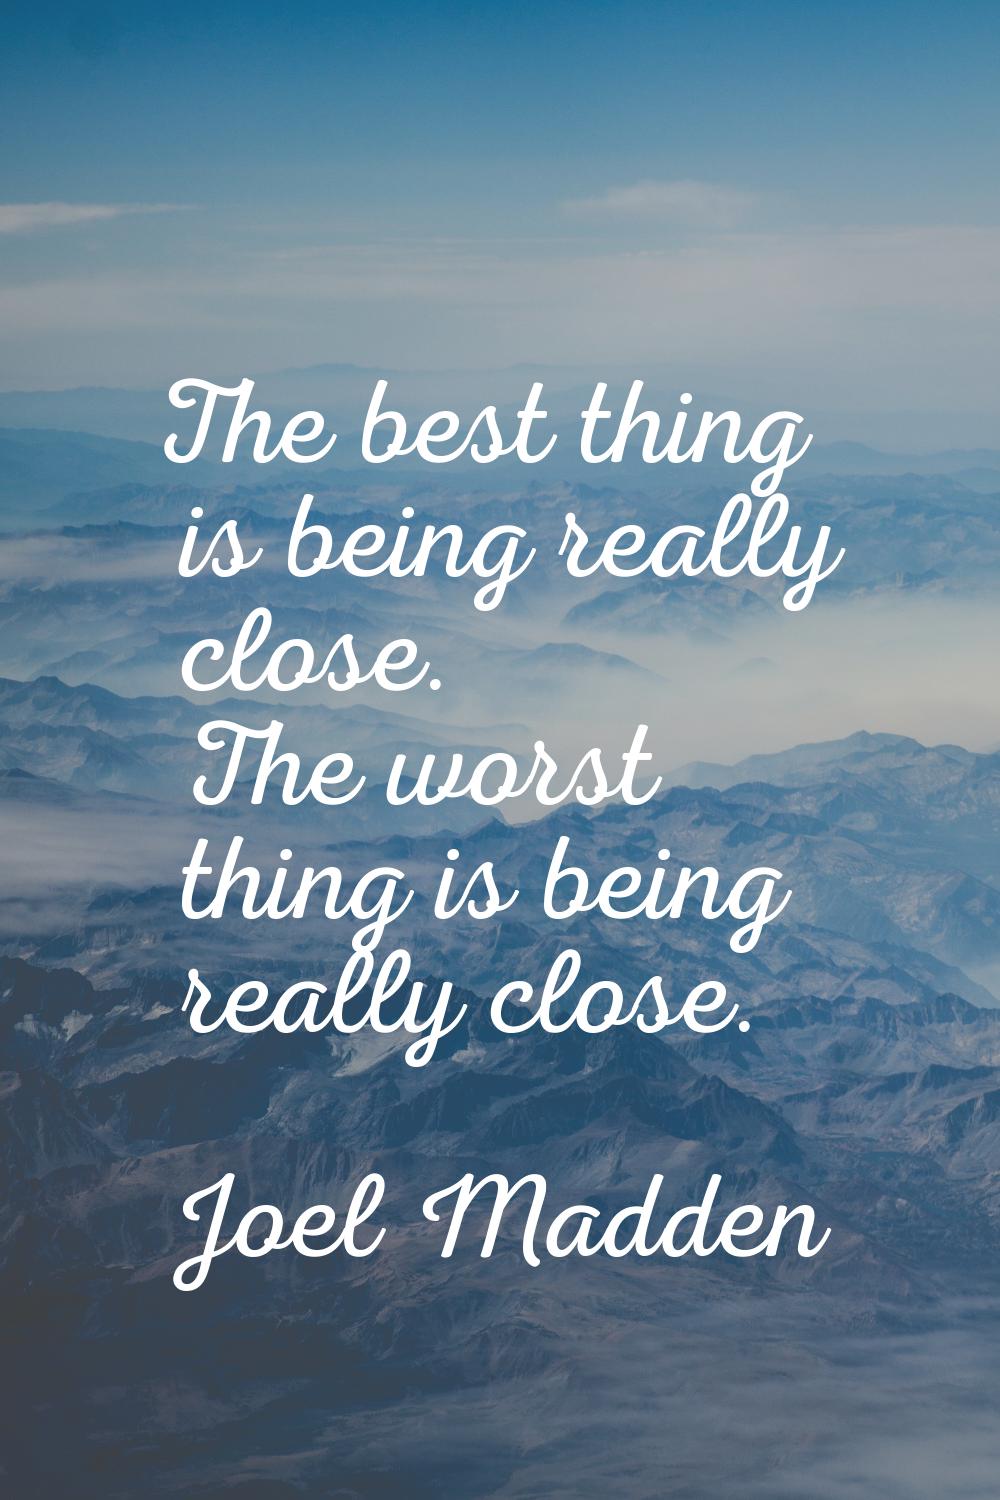 The best thing is being really close. The worst thing is being really close.